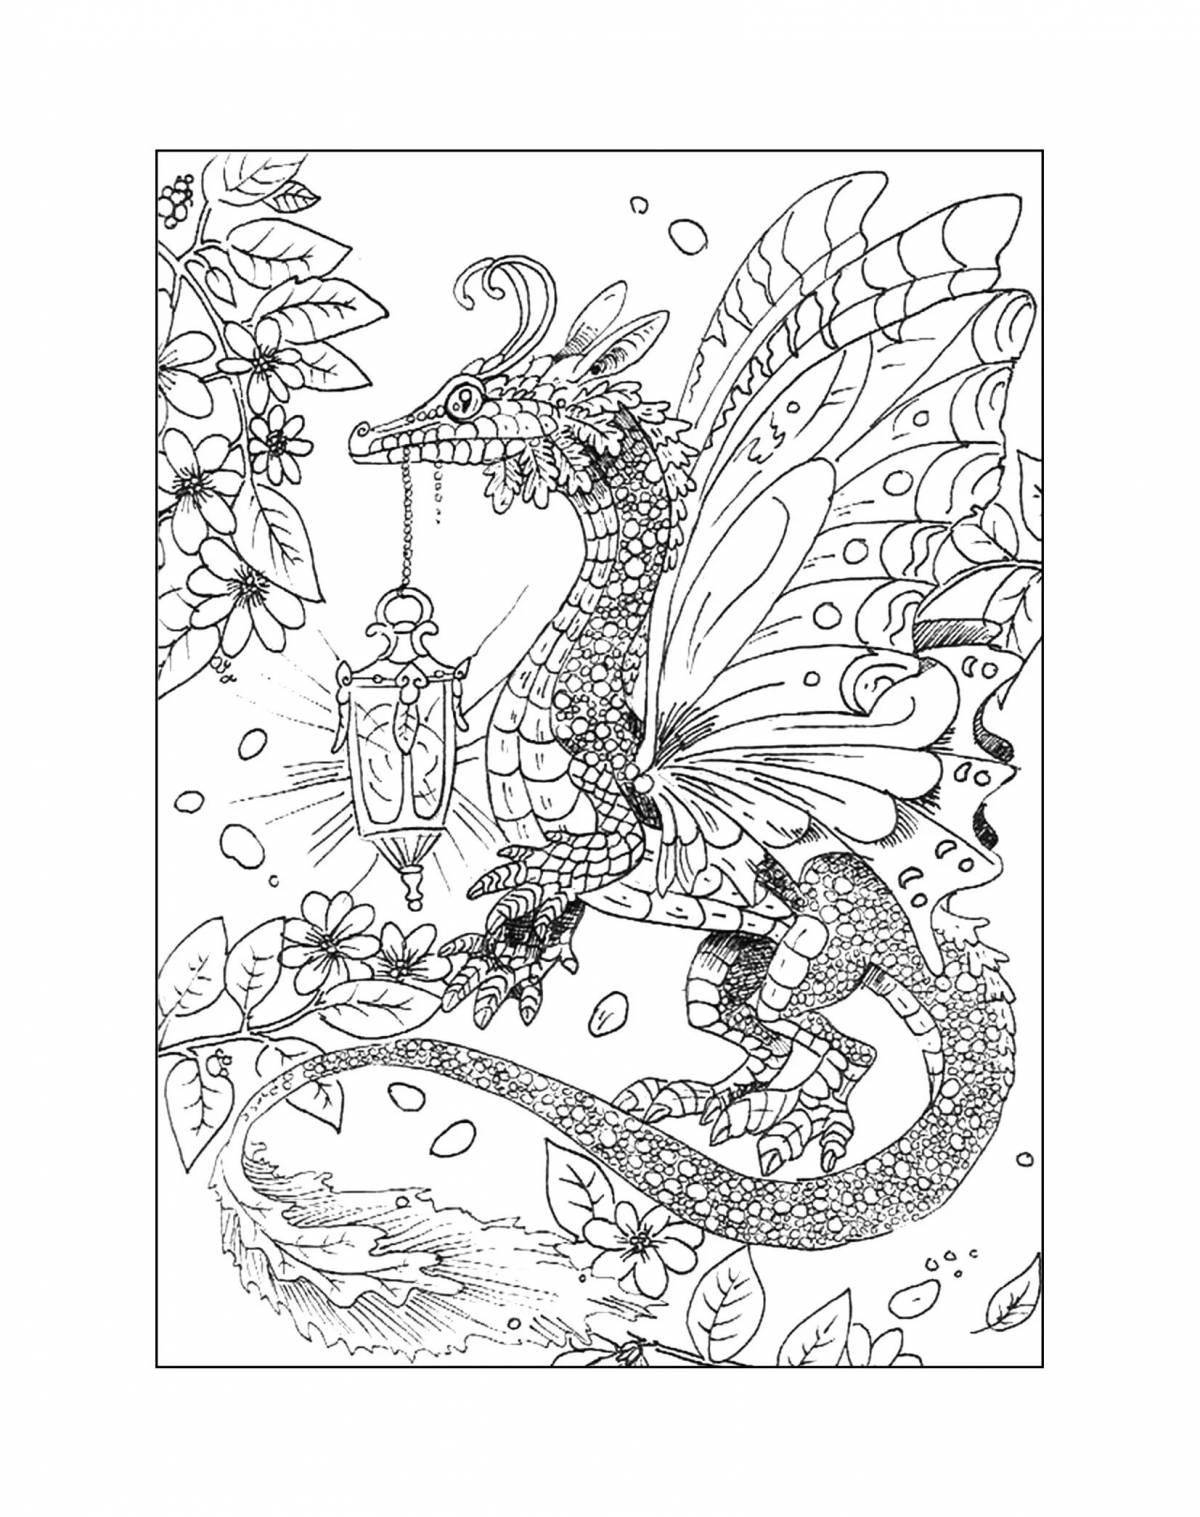 When dragons dream grand coloring page